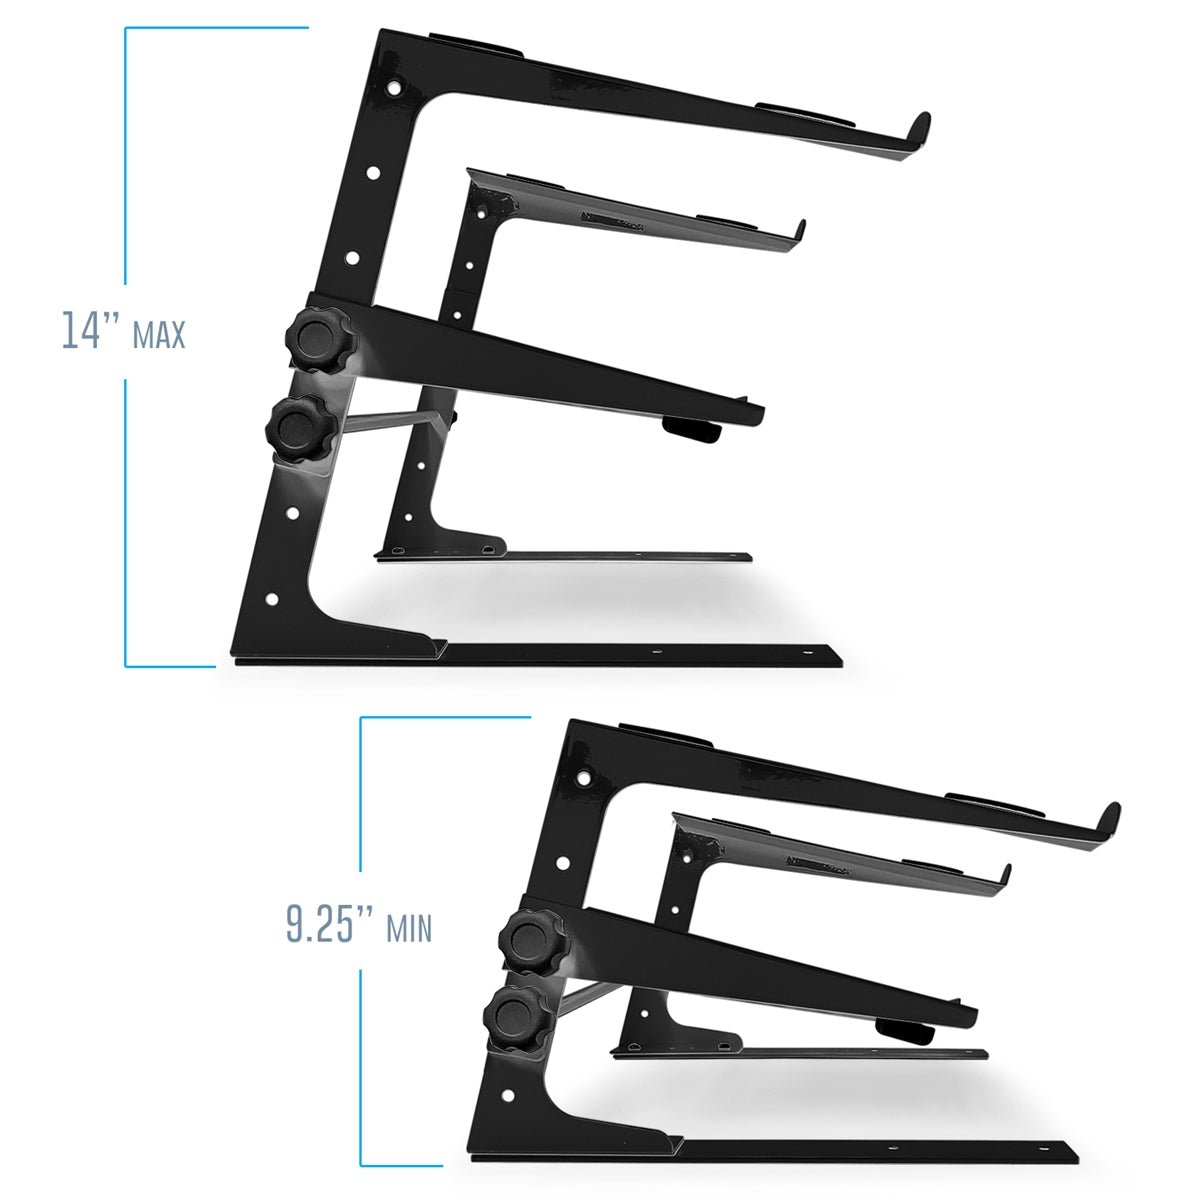 AxcessAbles Two-Tier Adjustable DJ Stand with Clamps | For DJ Controllers, Music Mixers, Laptops up to 20lbs.| DJ Controller Stand Compatible with DDJ-REV1, DDJ-FLX4 | DJ Laptop Stand (LTS-03 Black)